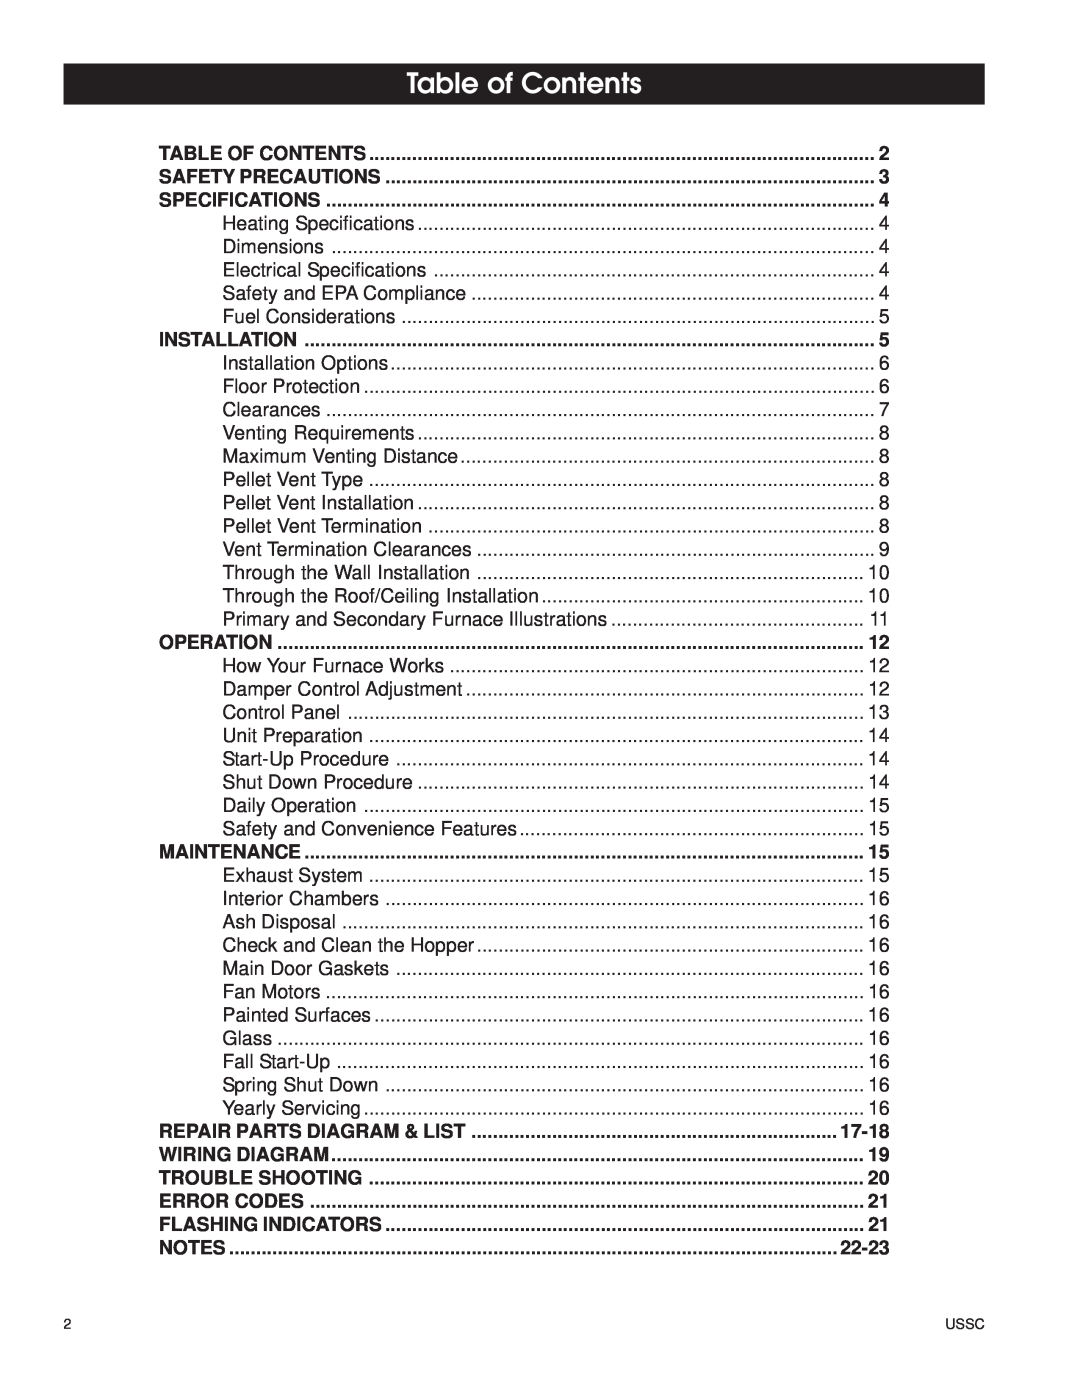 United States Stove 6110 owner manual Table of Contents, Repair Parts Diagram & List, 17-18, 22-23 